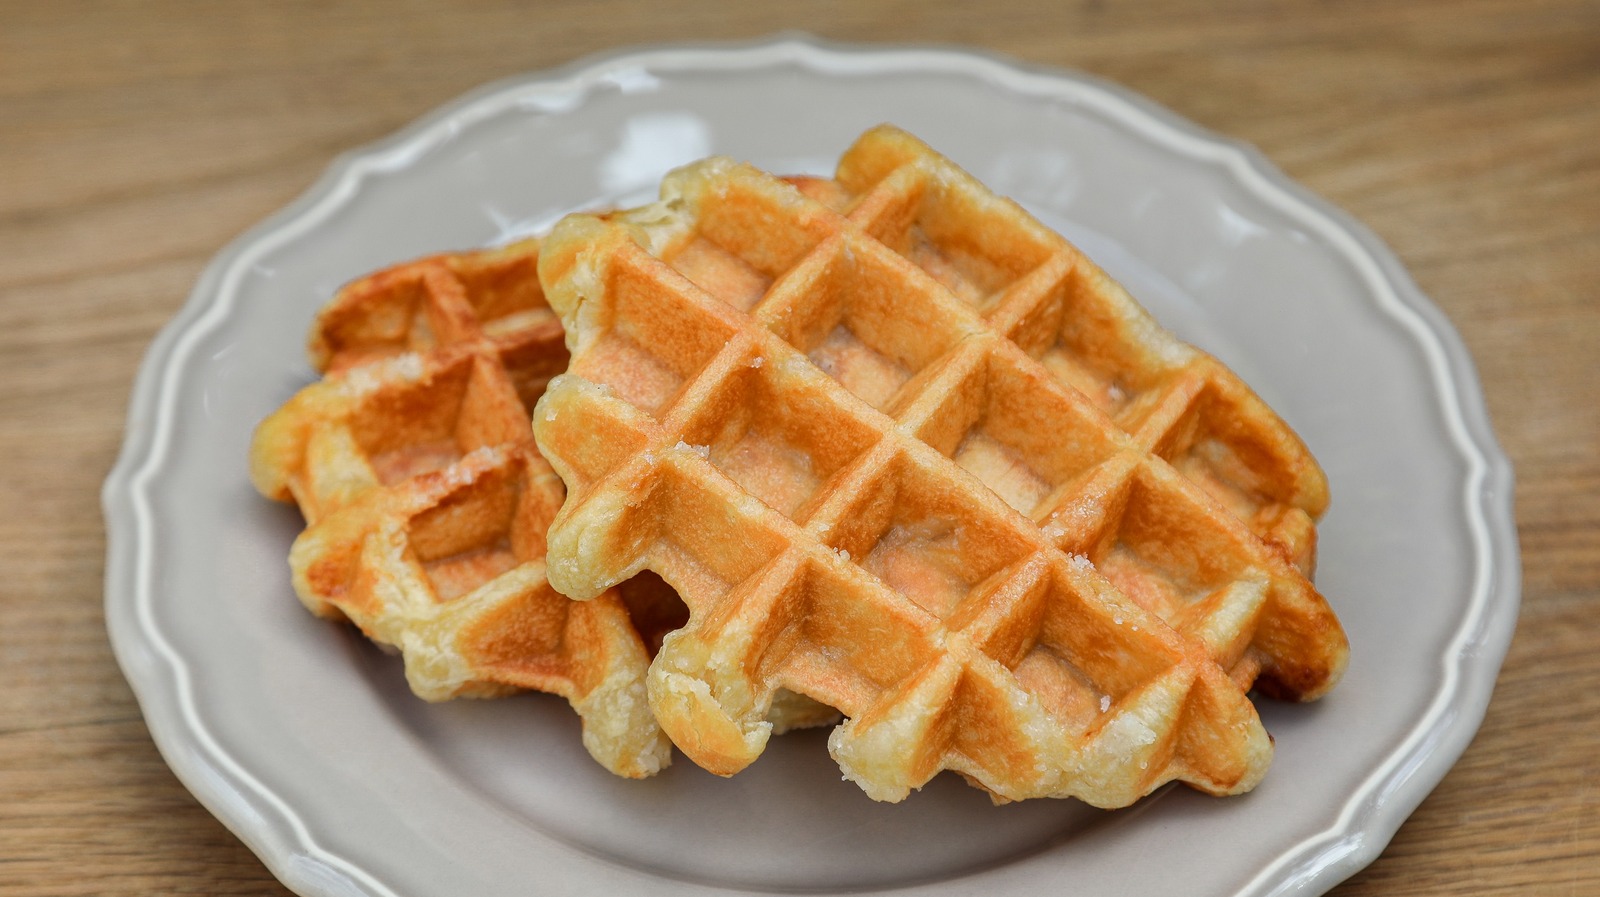 Delicious Waffle Bowl Maker - A Game Changer!